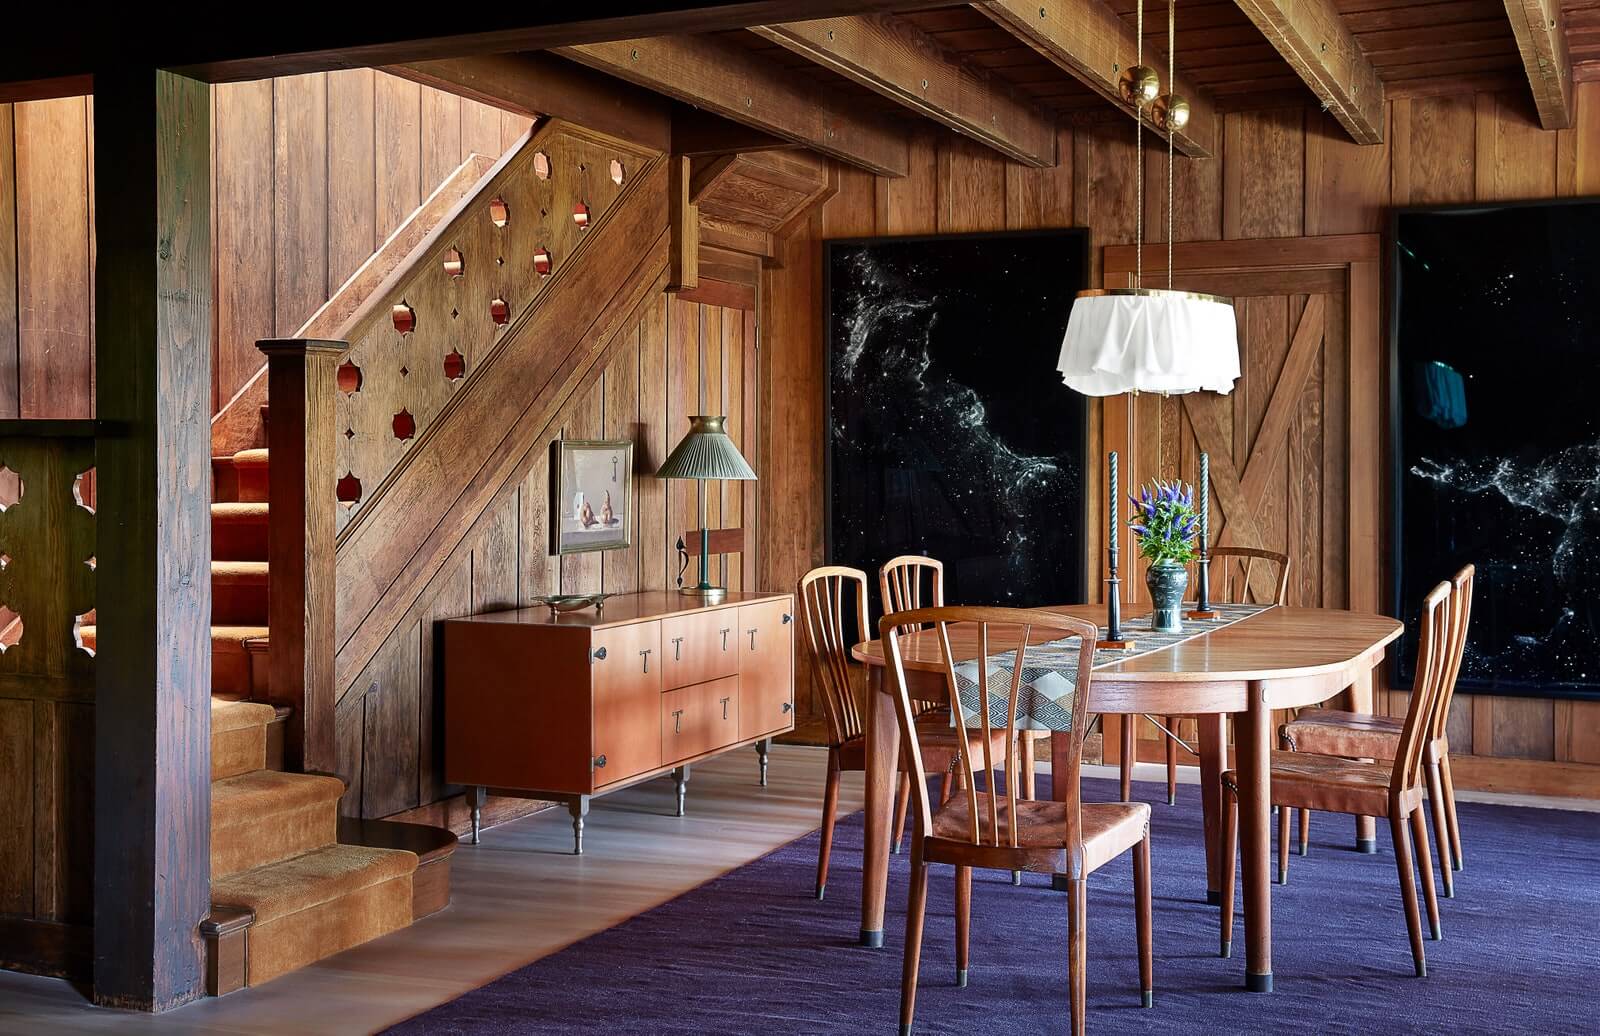 20 Celebrity Dining Rooms That Are A Feast For The Eyes   Hommés ...